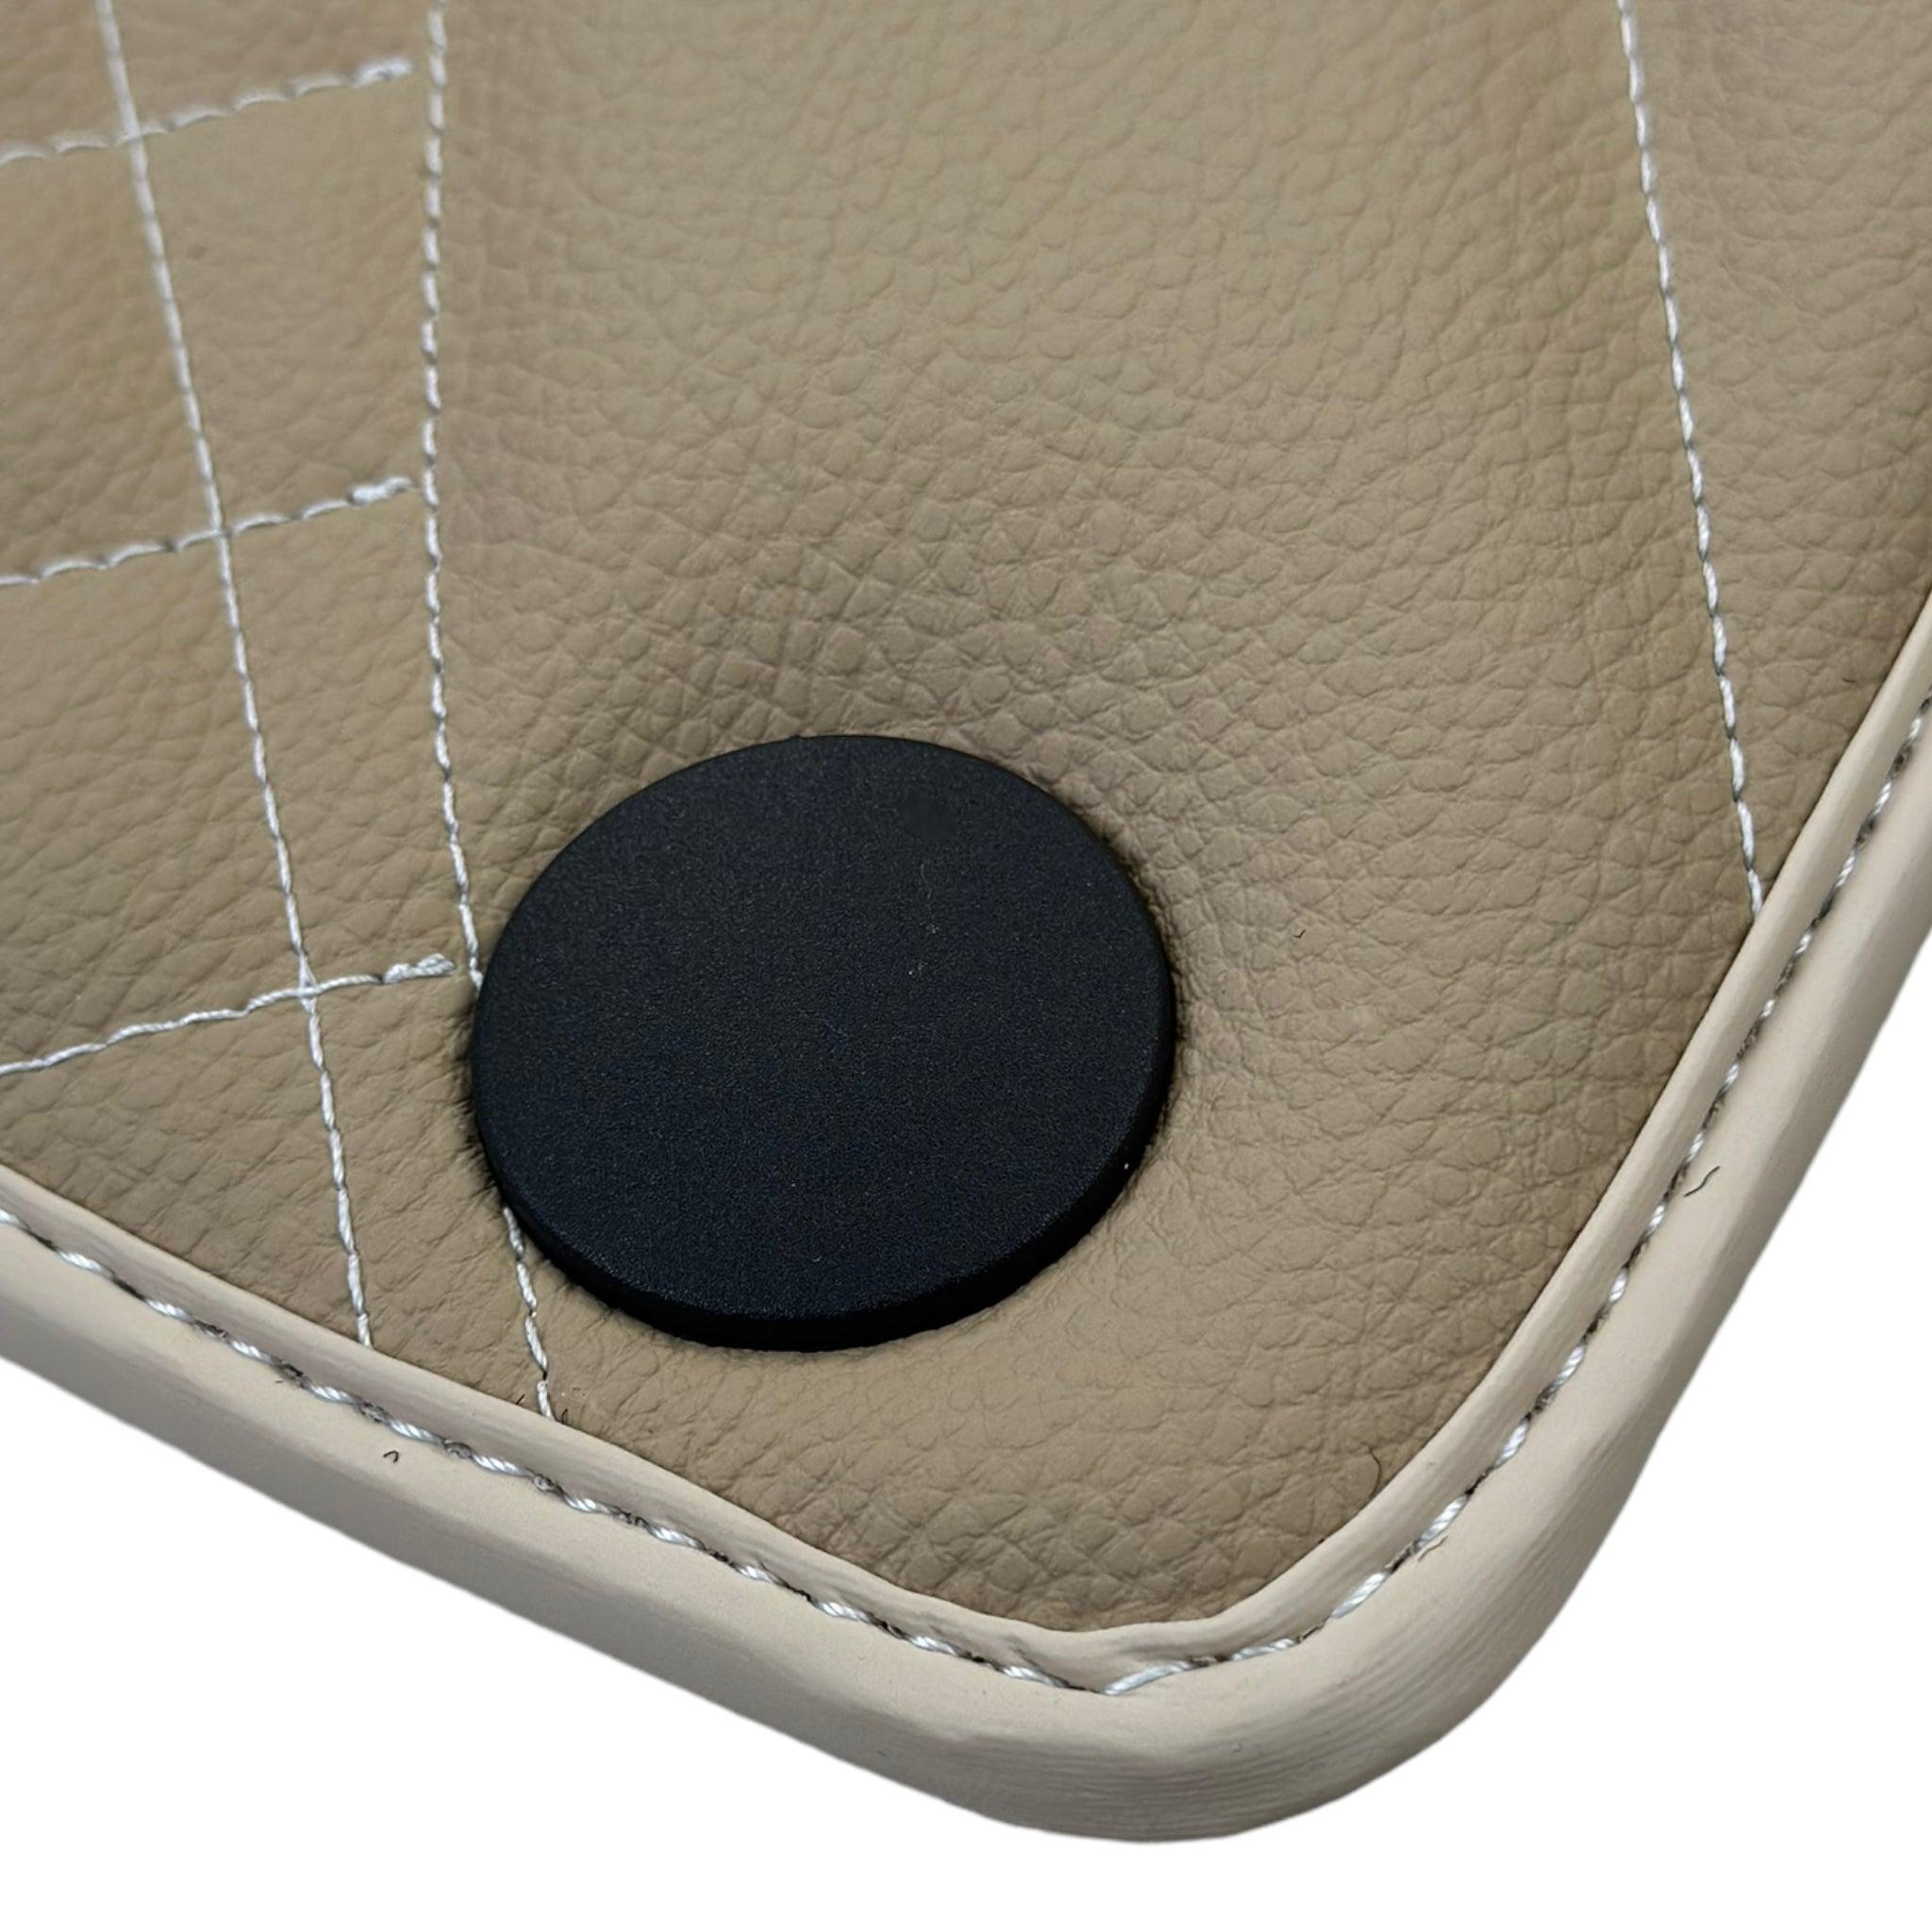 Beige Leather Floor Mats For Mercedes Benz GLE-Class C167 Coupe - 5 Seats (2020-2023) Hybrid